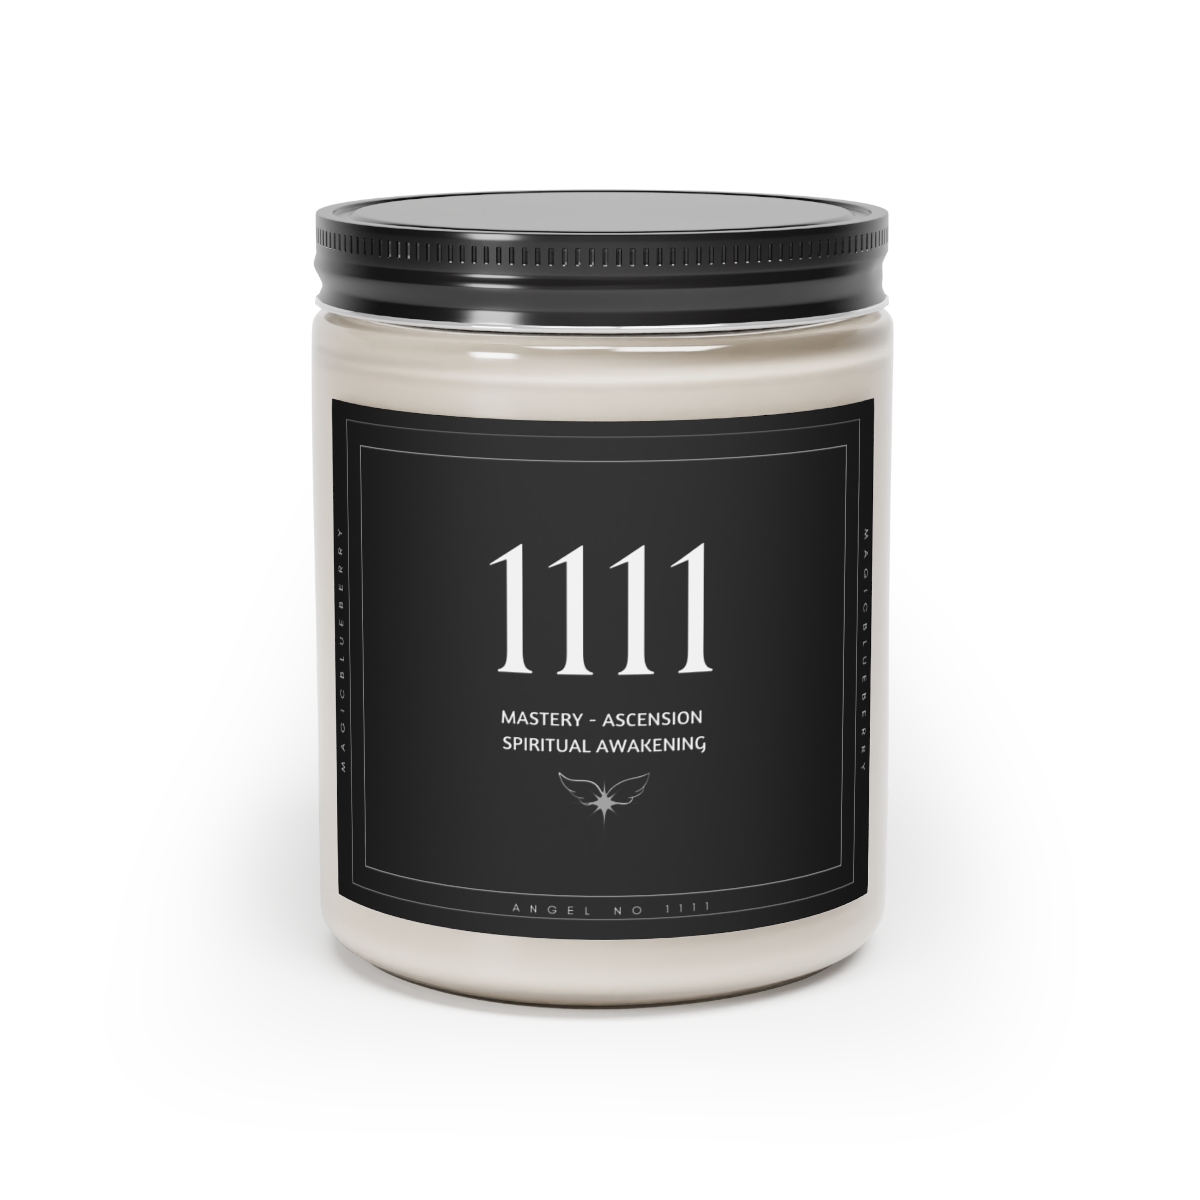 Angel Spell 1111 - Scented Vegan Soy Wax Candles, Clear Jar Candle, Spell Candles, Sassy Candle, Vegan Candle, Cotton Wick Candle product thumbnail image